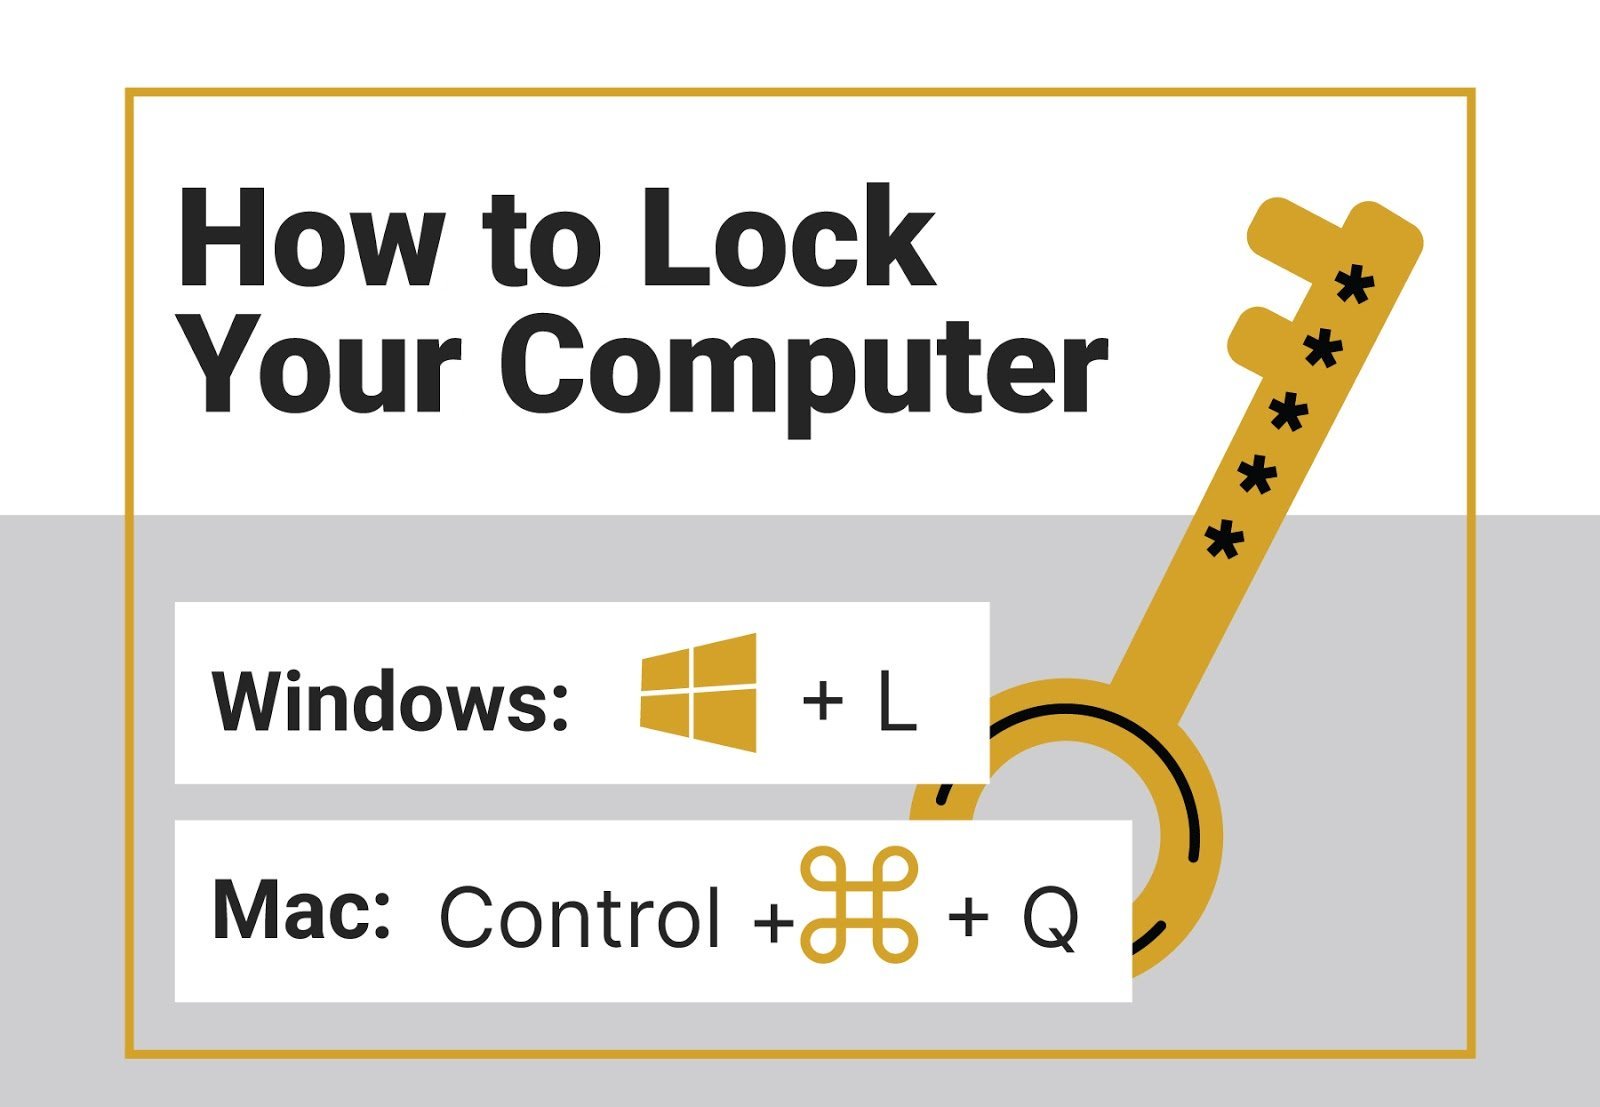 Illustration showing the keyboard shortcuts to lock your computer on Windows and Mac